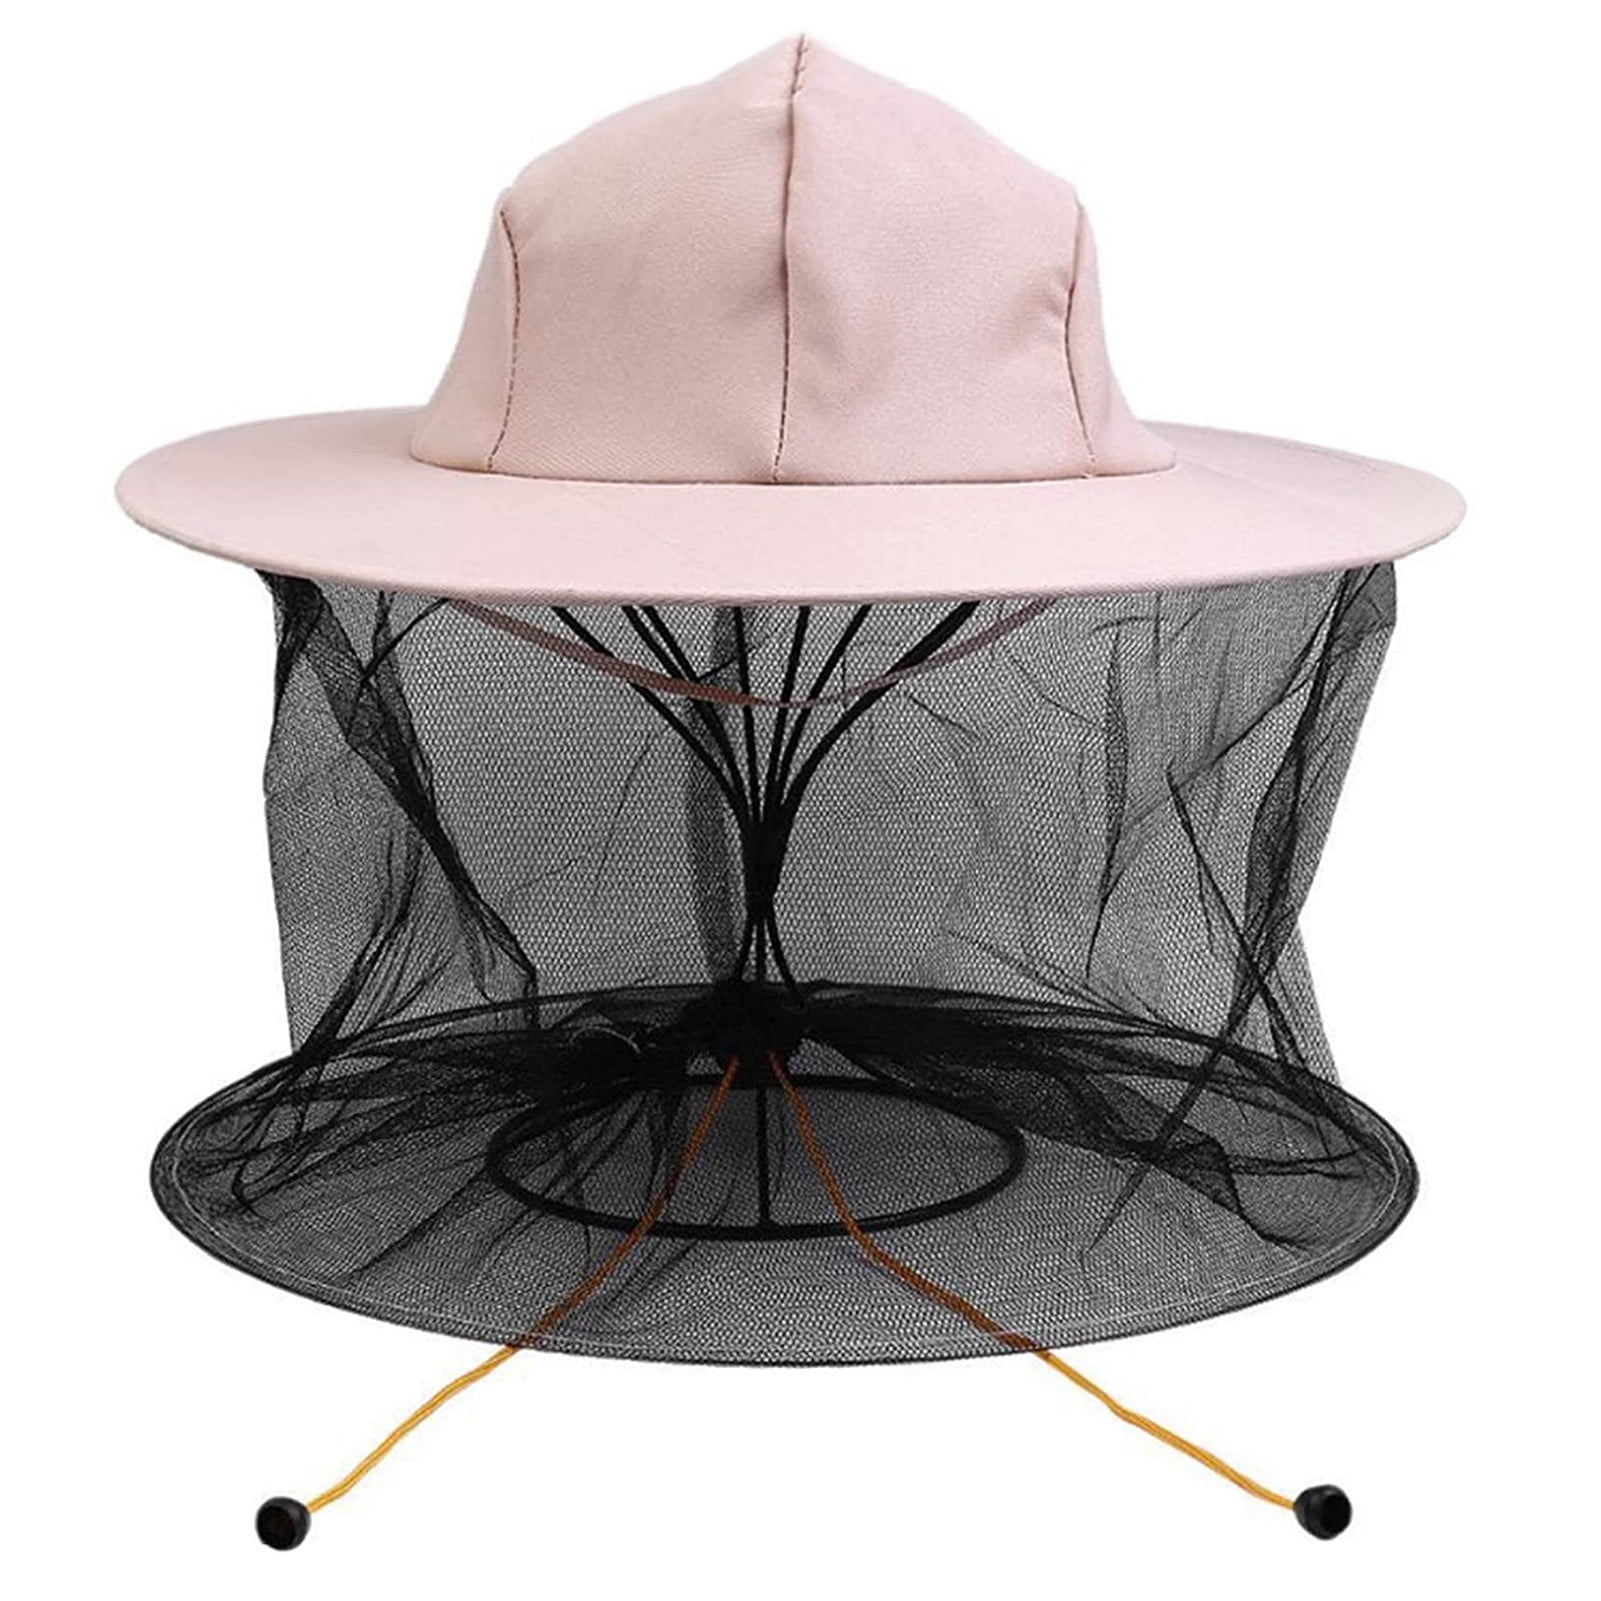 Supplies Beekeeping Hat Veil Face Anti-bee Protection Industrial Practical 